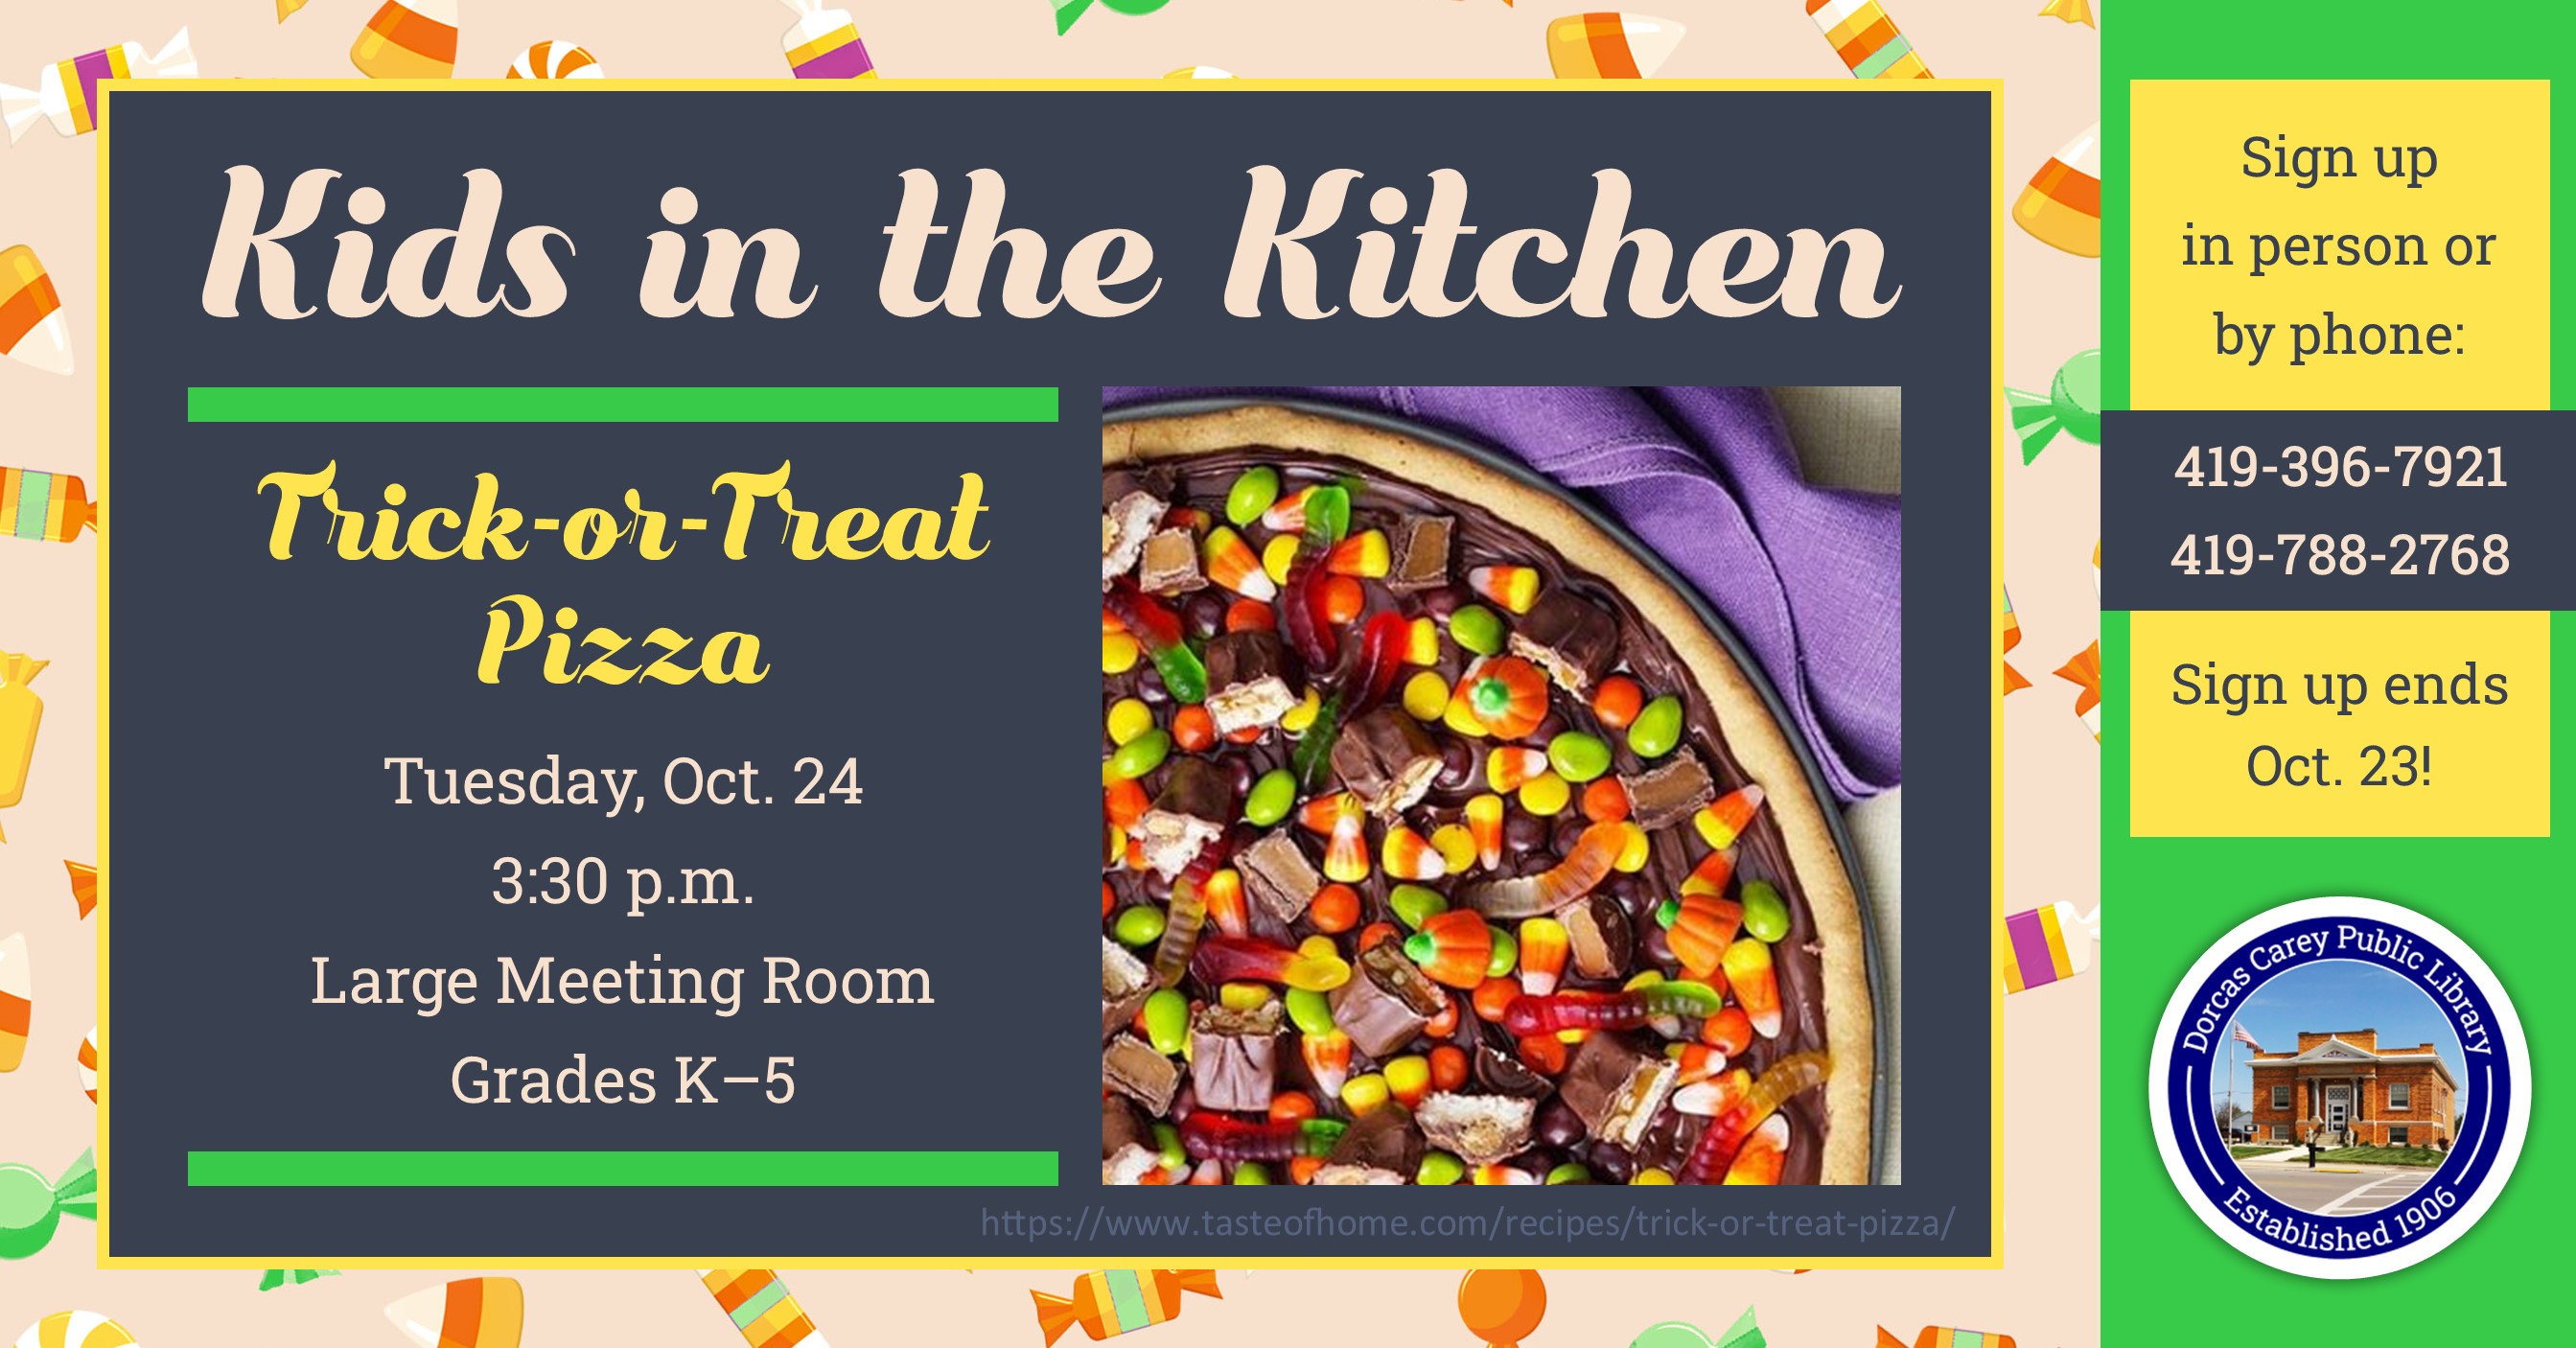 Come to the library on the fourth Tuesday of the month at 3:30 p.m. to learn how to make treats that can be shared with family and friends.  Children in kindergarten through grade 5 are encouraged to join the cooking fun!  This month’s recipe is Trick or Treat Pizza.  Please sign up at the adult circulation desk or by phone at 419-396-7921 or 419-788-2768.